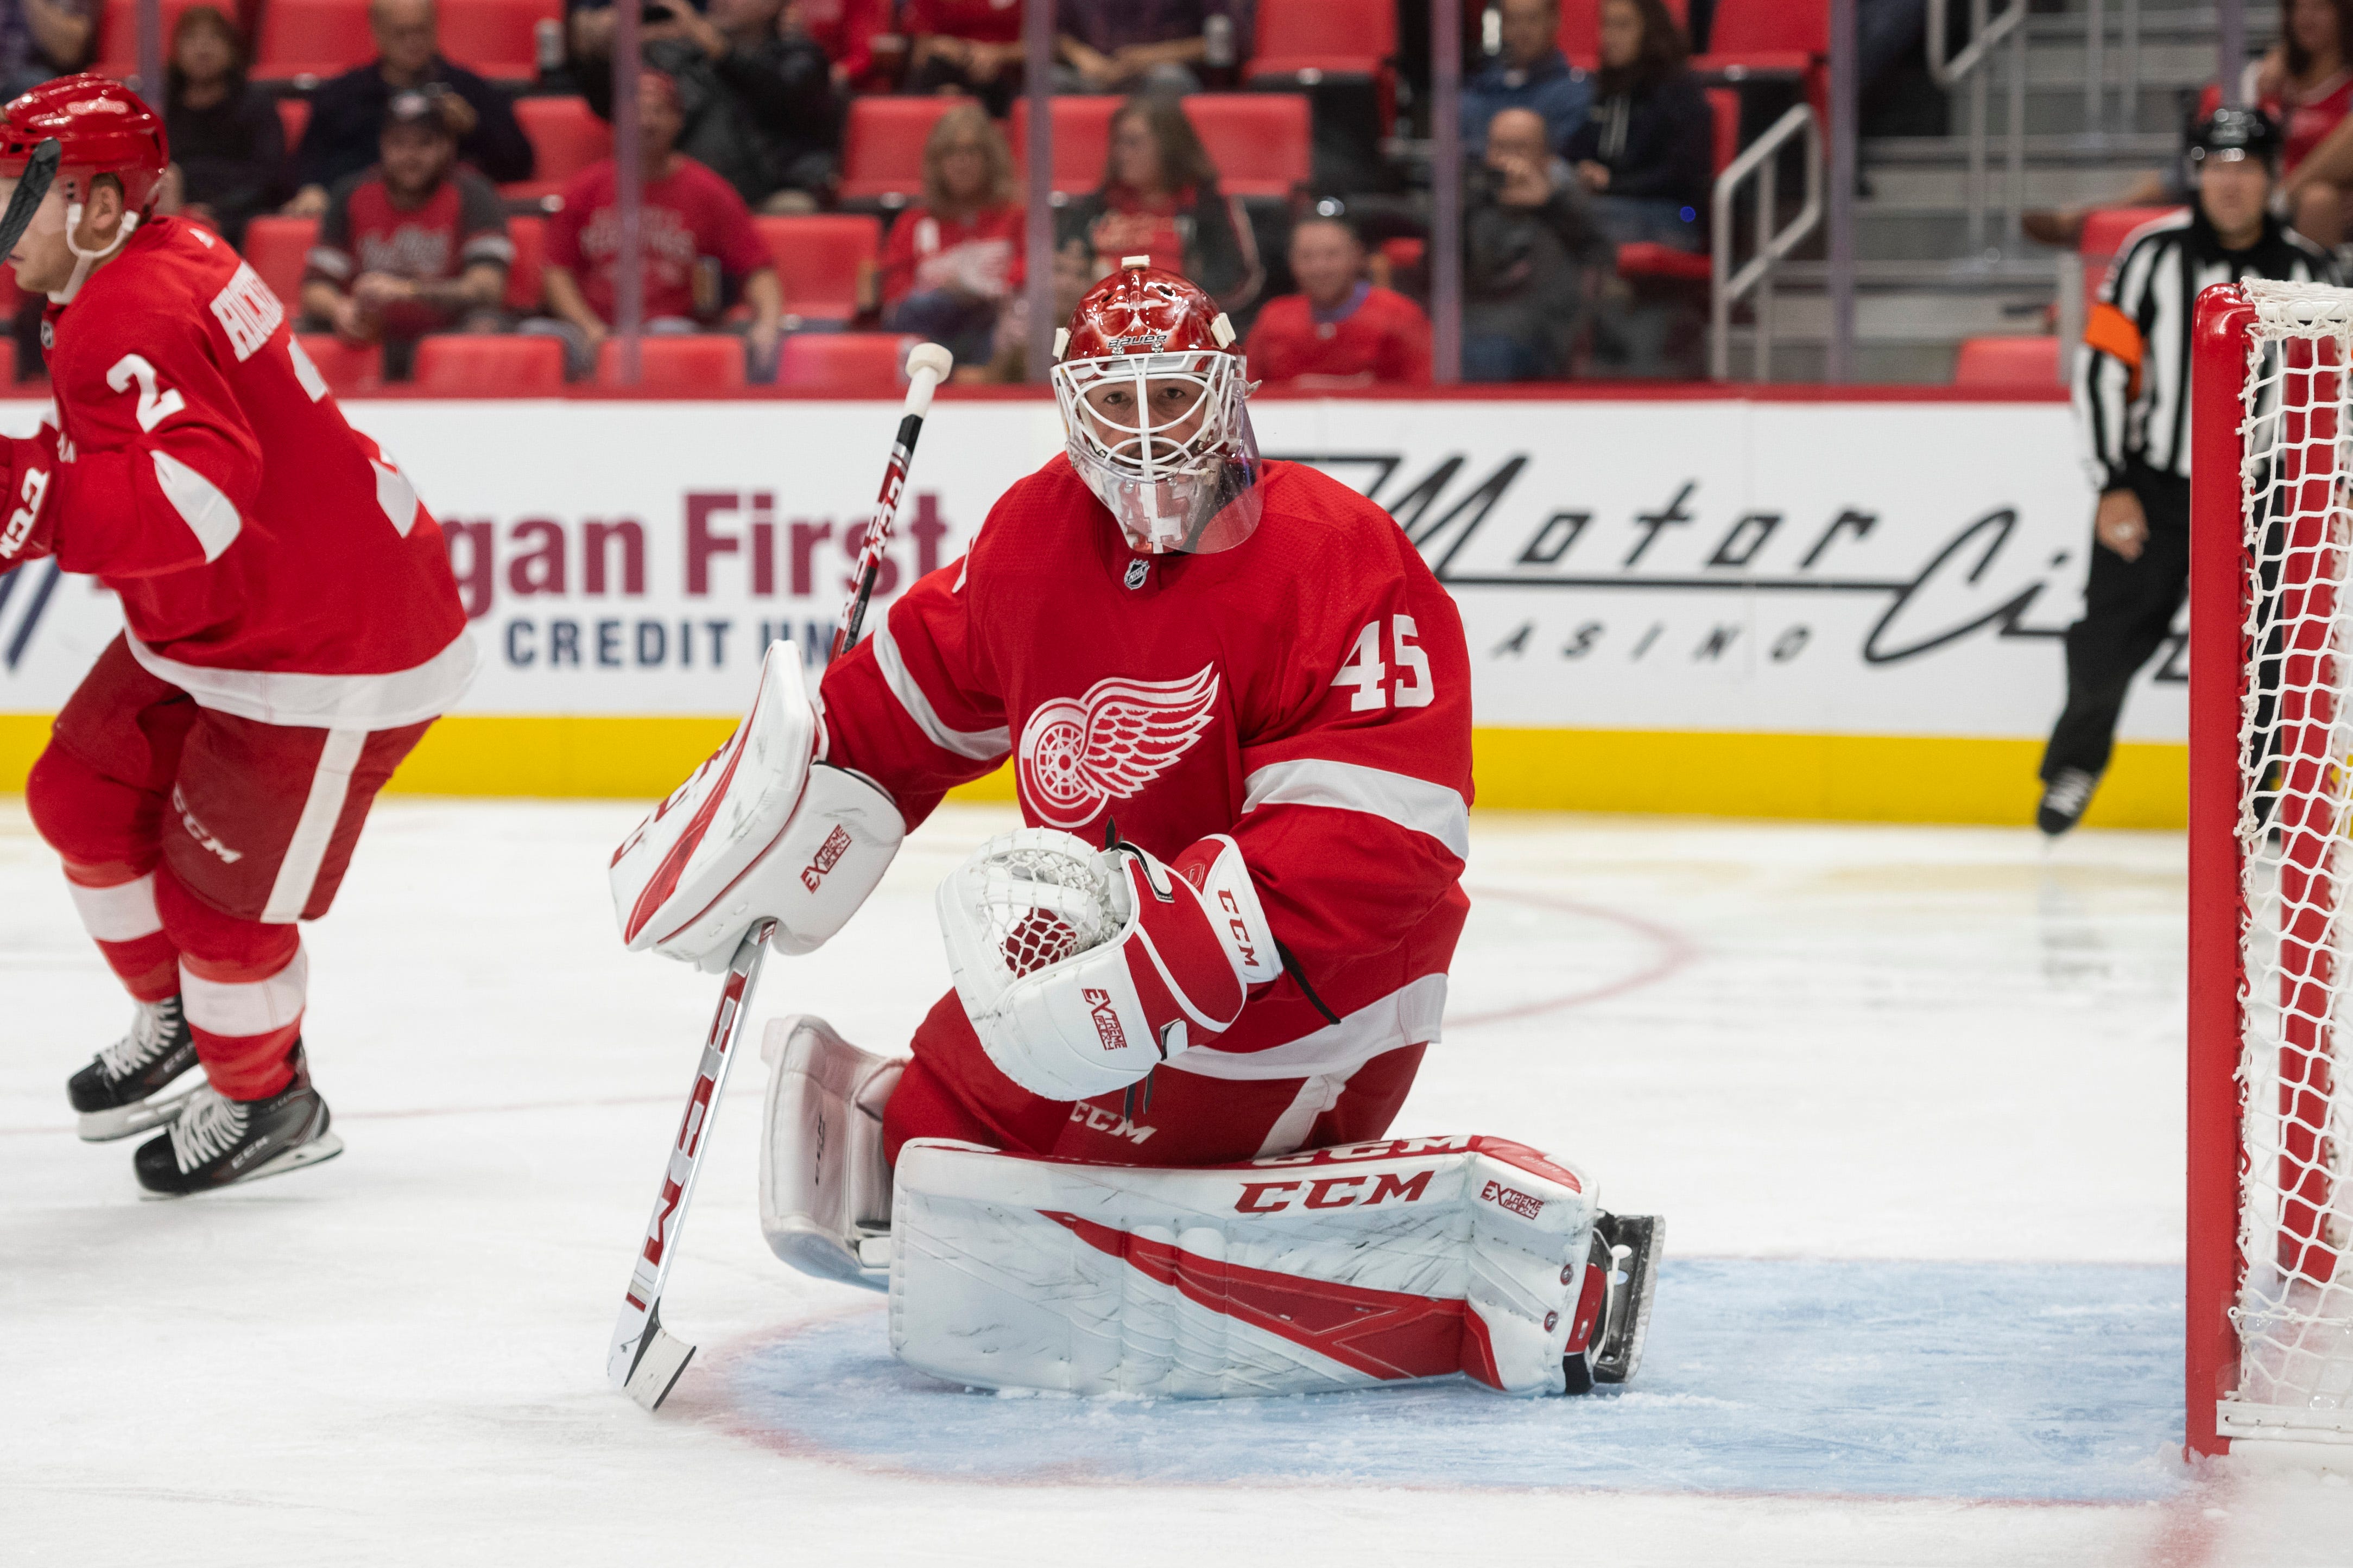 18. Jonathan Bernier, goaltender. At a position the Wings don’t have a ton of organizational depth, Bernier remains a firm backup to Jimmy Howard. Bernier didn’t overwhelm in his debut with the Wings, but the hope is he’ll rebound being more acclimated to his surroundings next season.